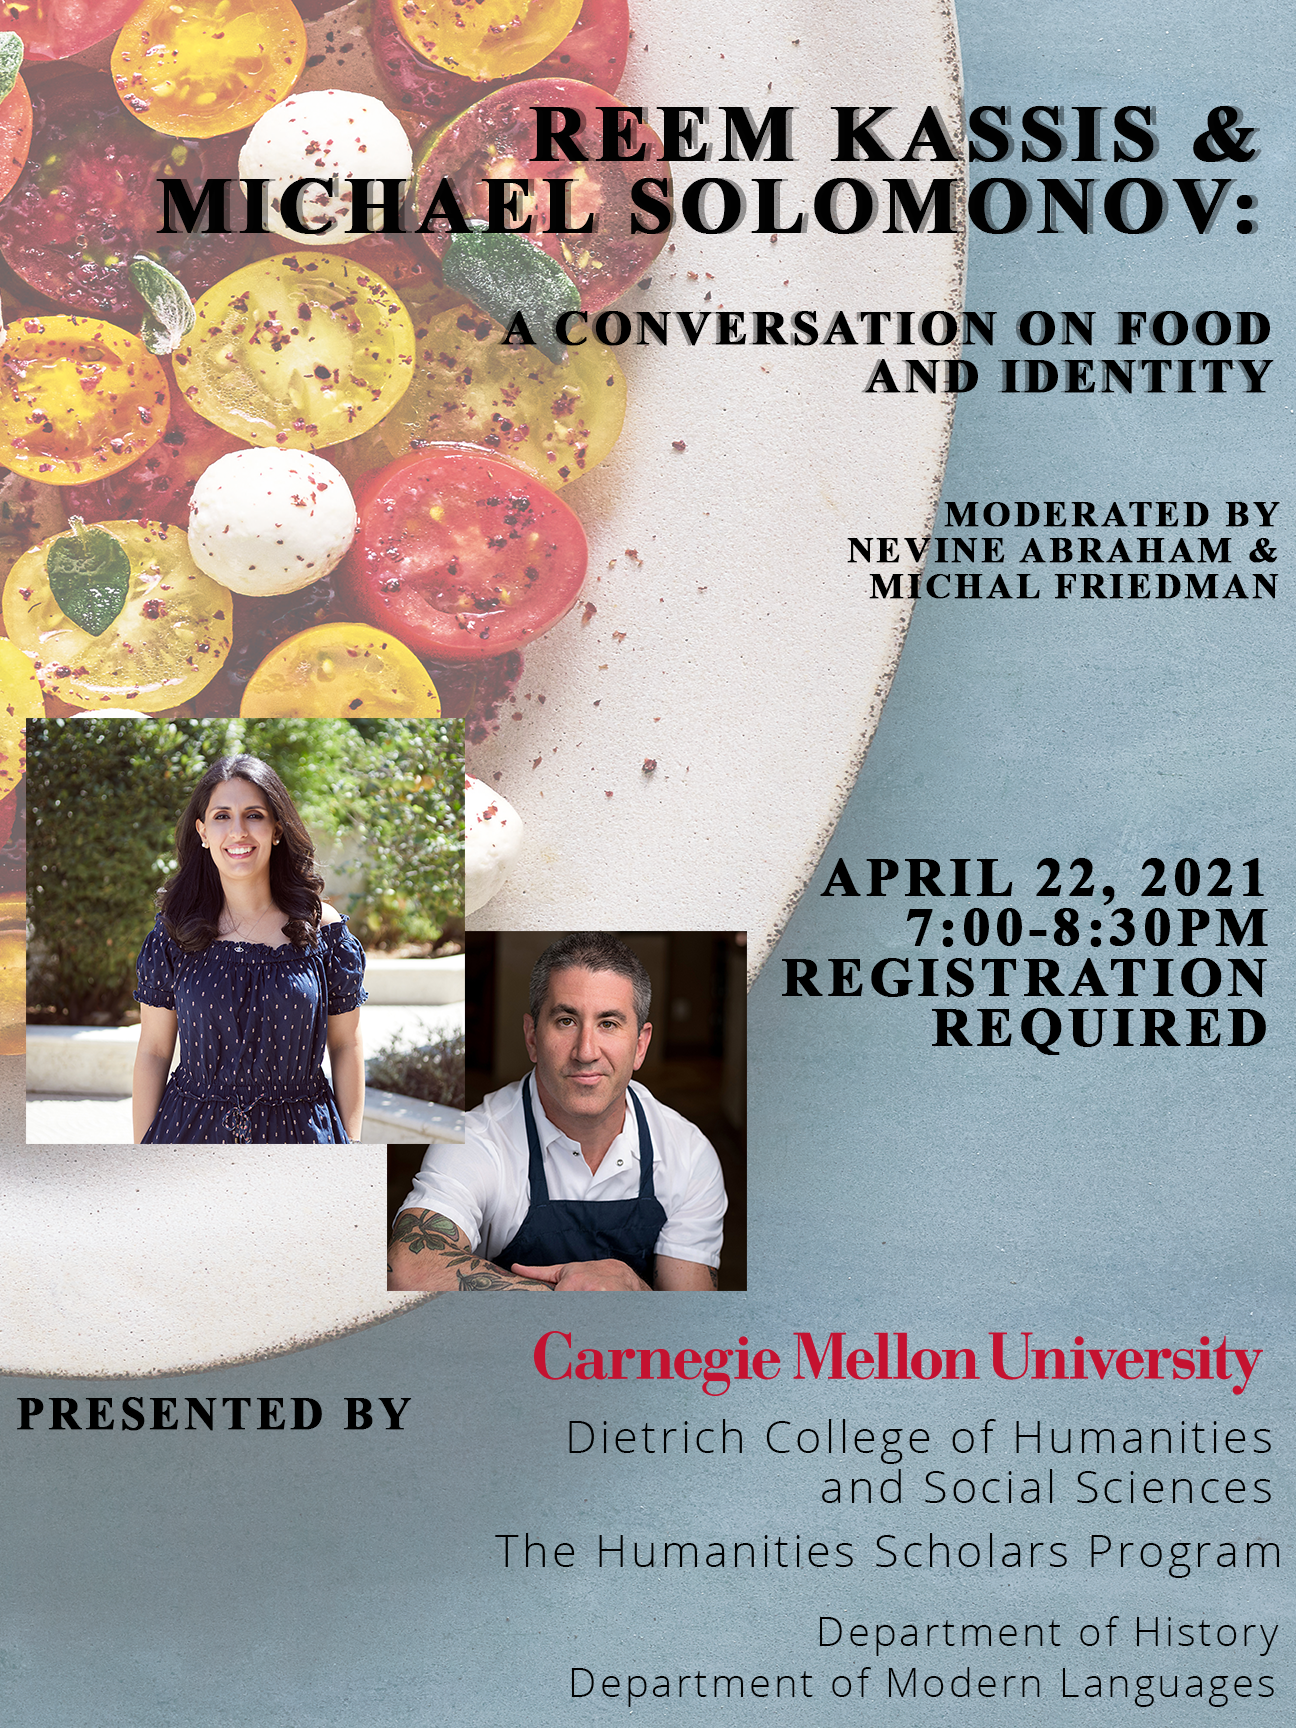 a conversation on food and identity event details